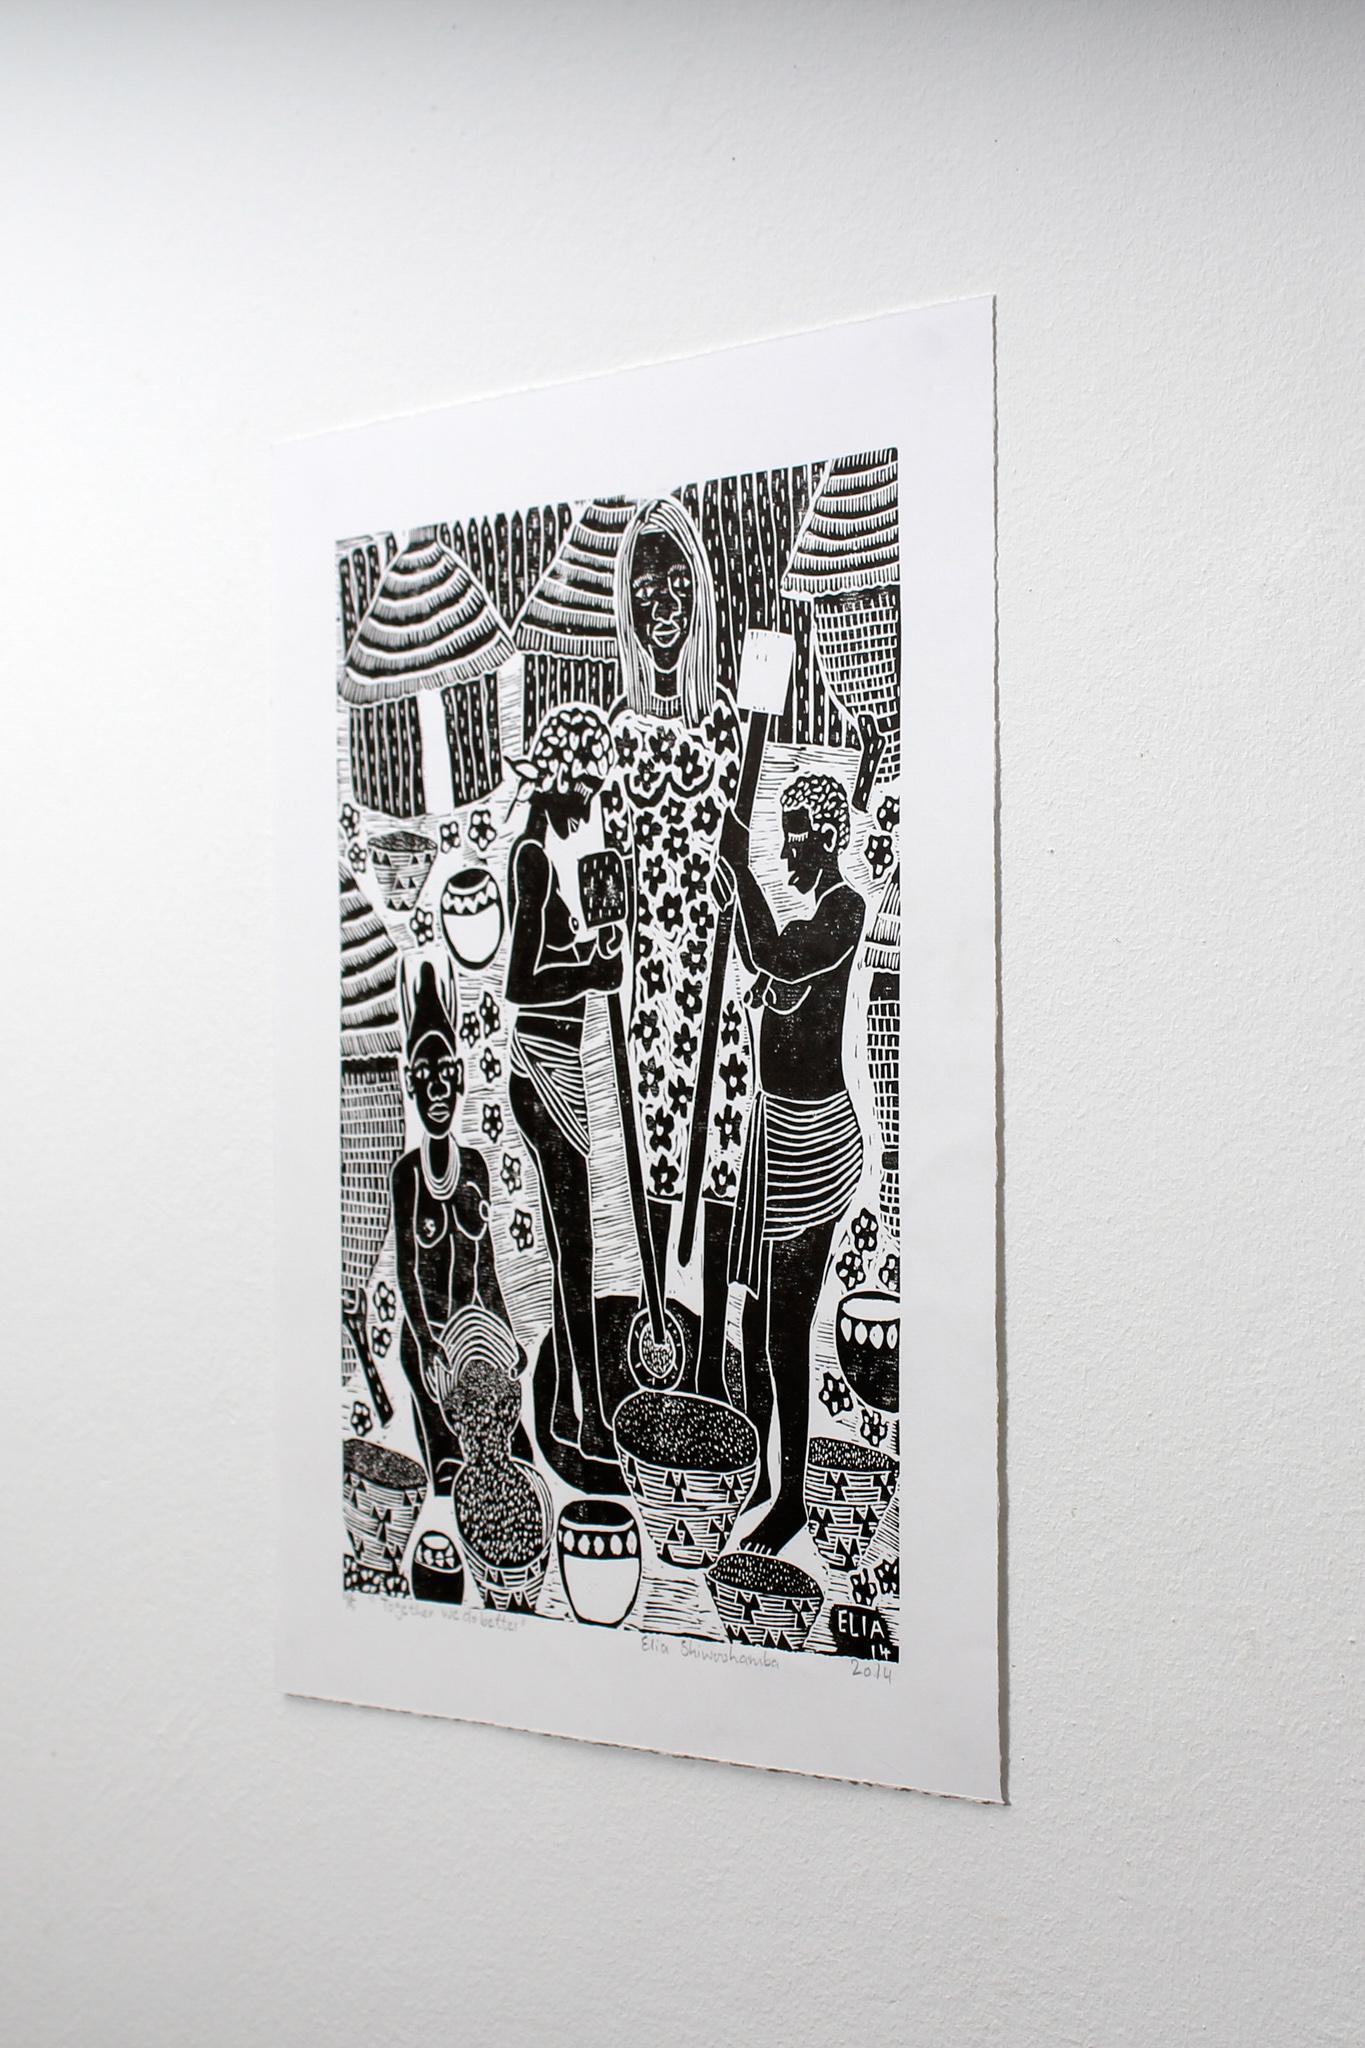 Did you take a time to know him, 2019. Linoleum block print on paper. Edition of 5

Elia Shiwoohamba was born in 1981 in Windhoek, Namibia. He graduated from the John Muafangejo Art Centre in Windhoek in 2006. Specialising in printmaking and